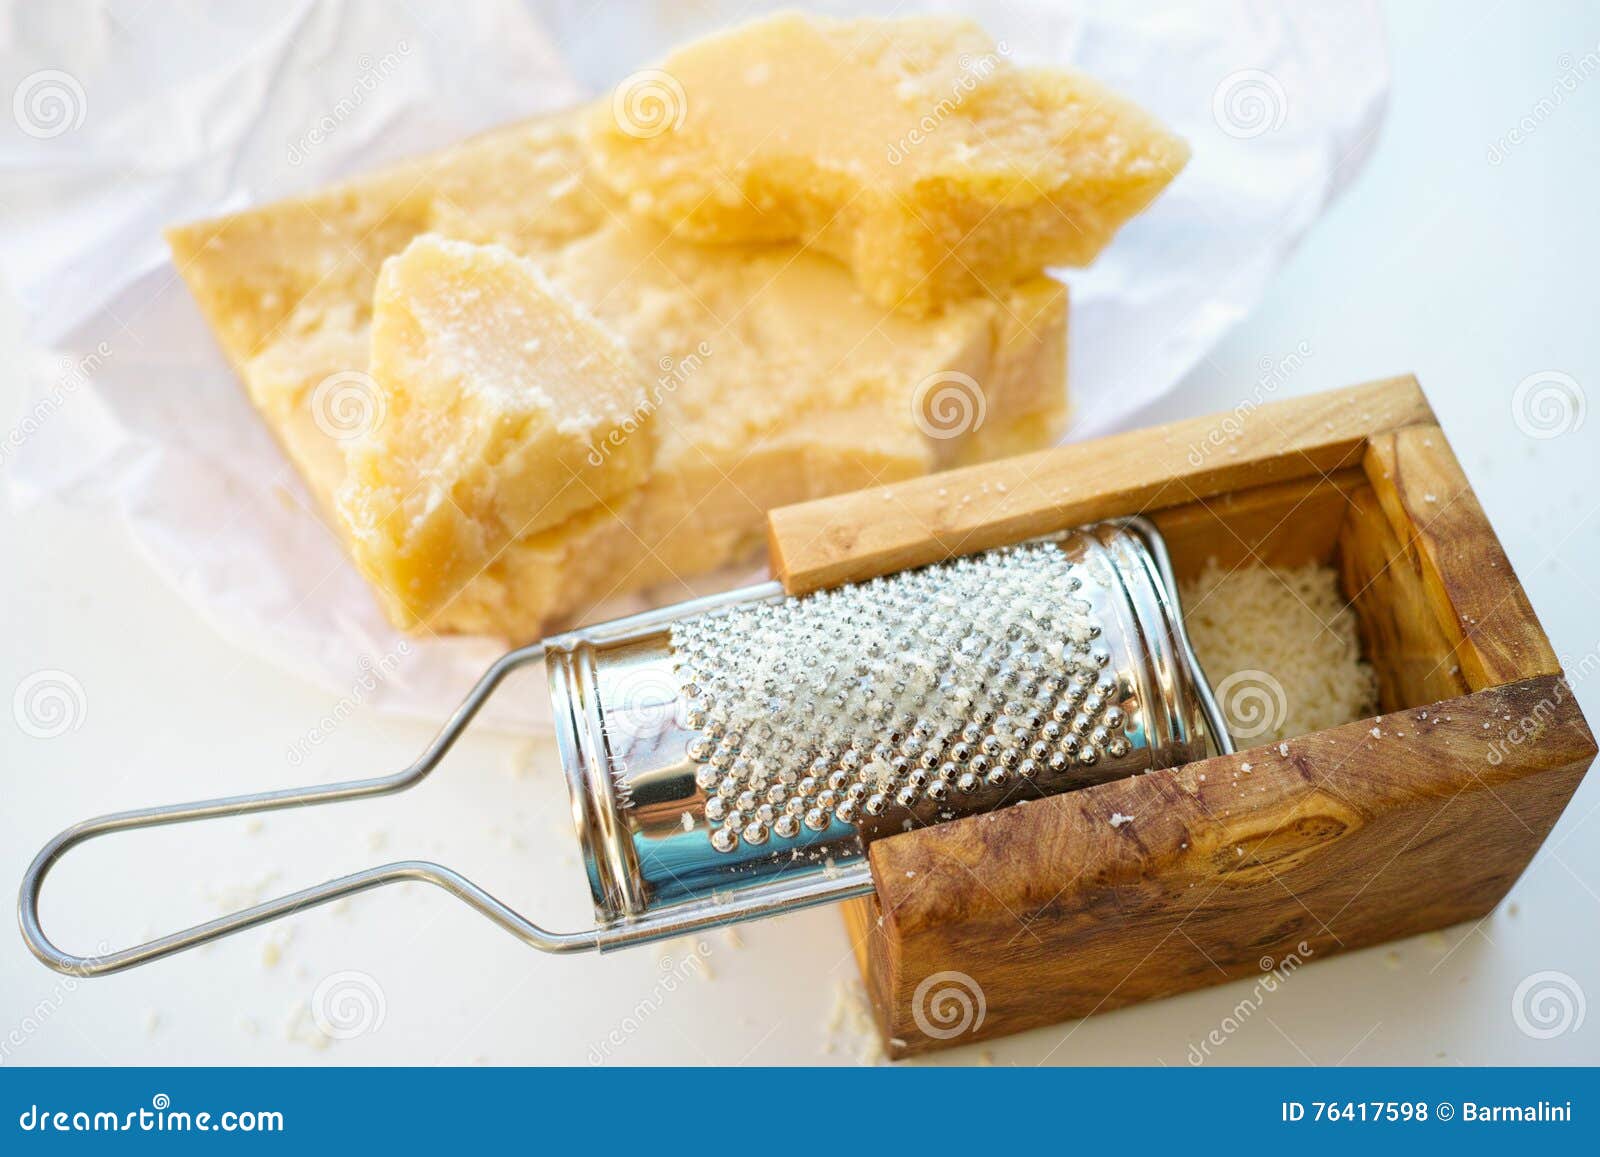 Cheese and Parmesan grater with an olive wood box, handmade